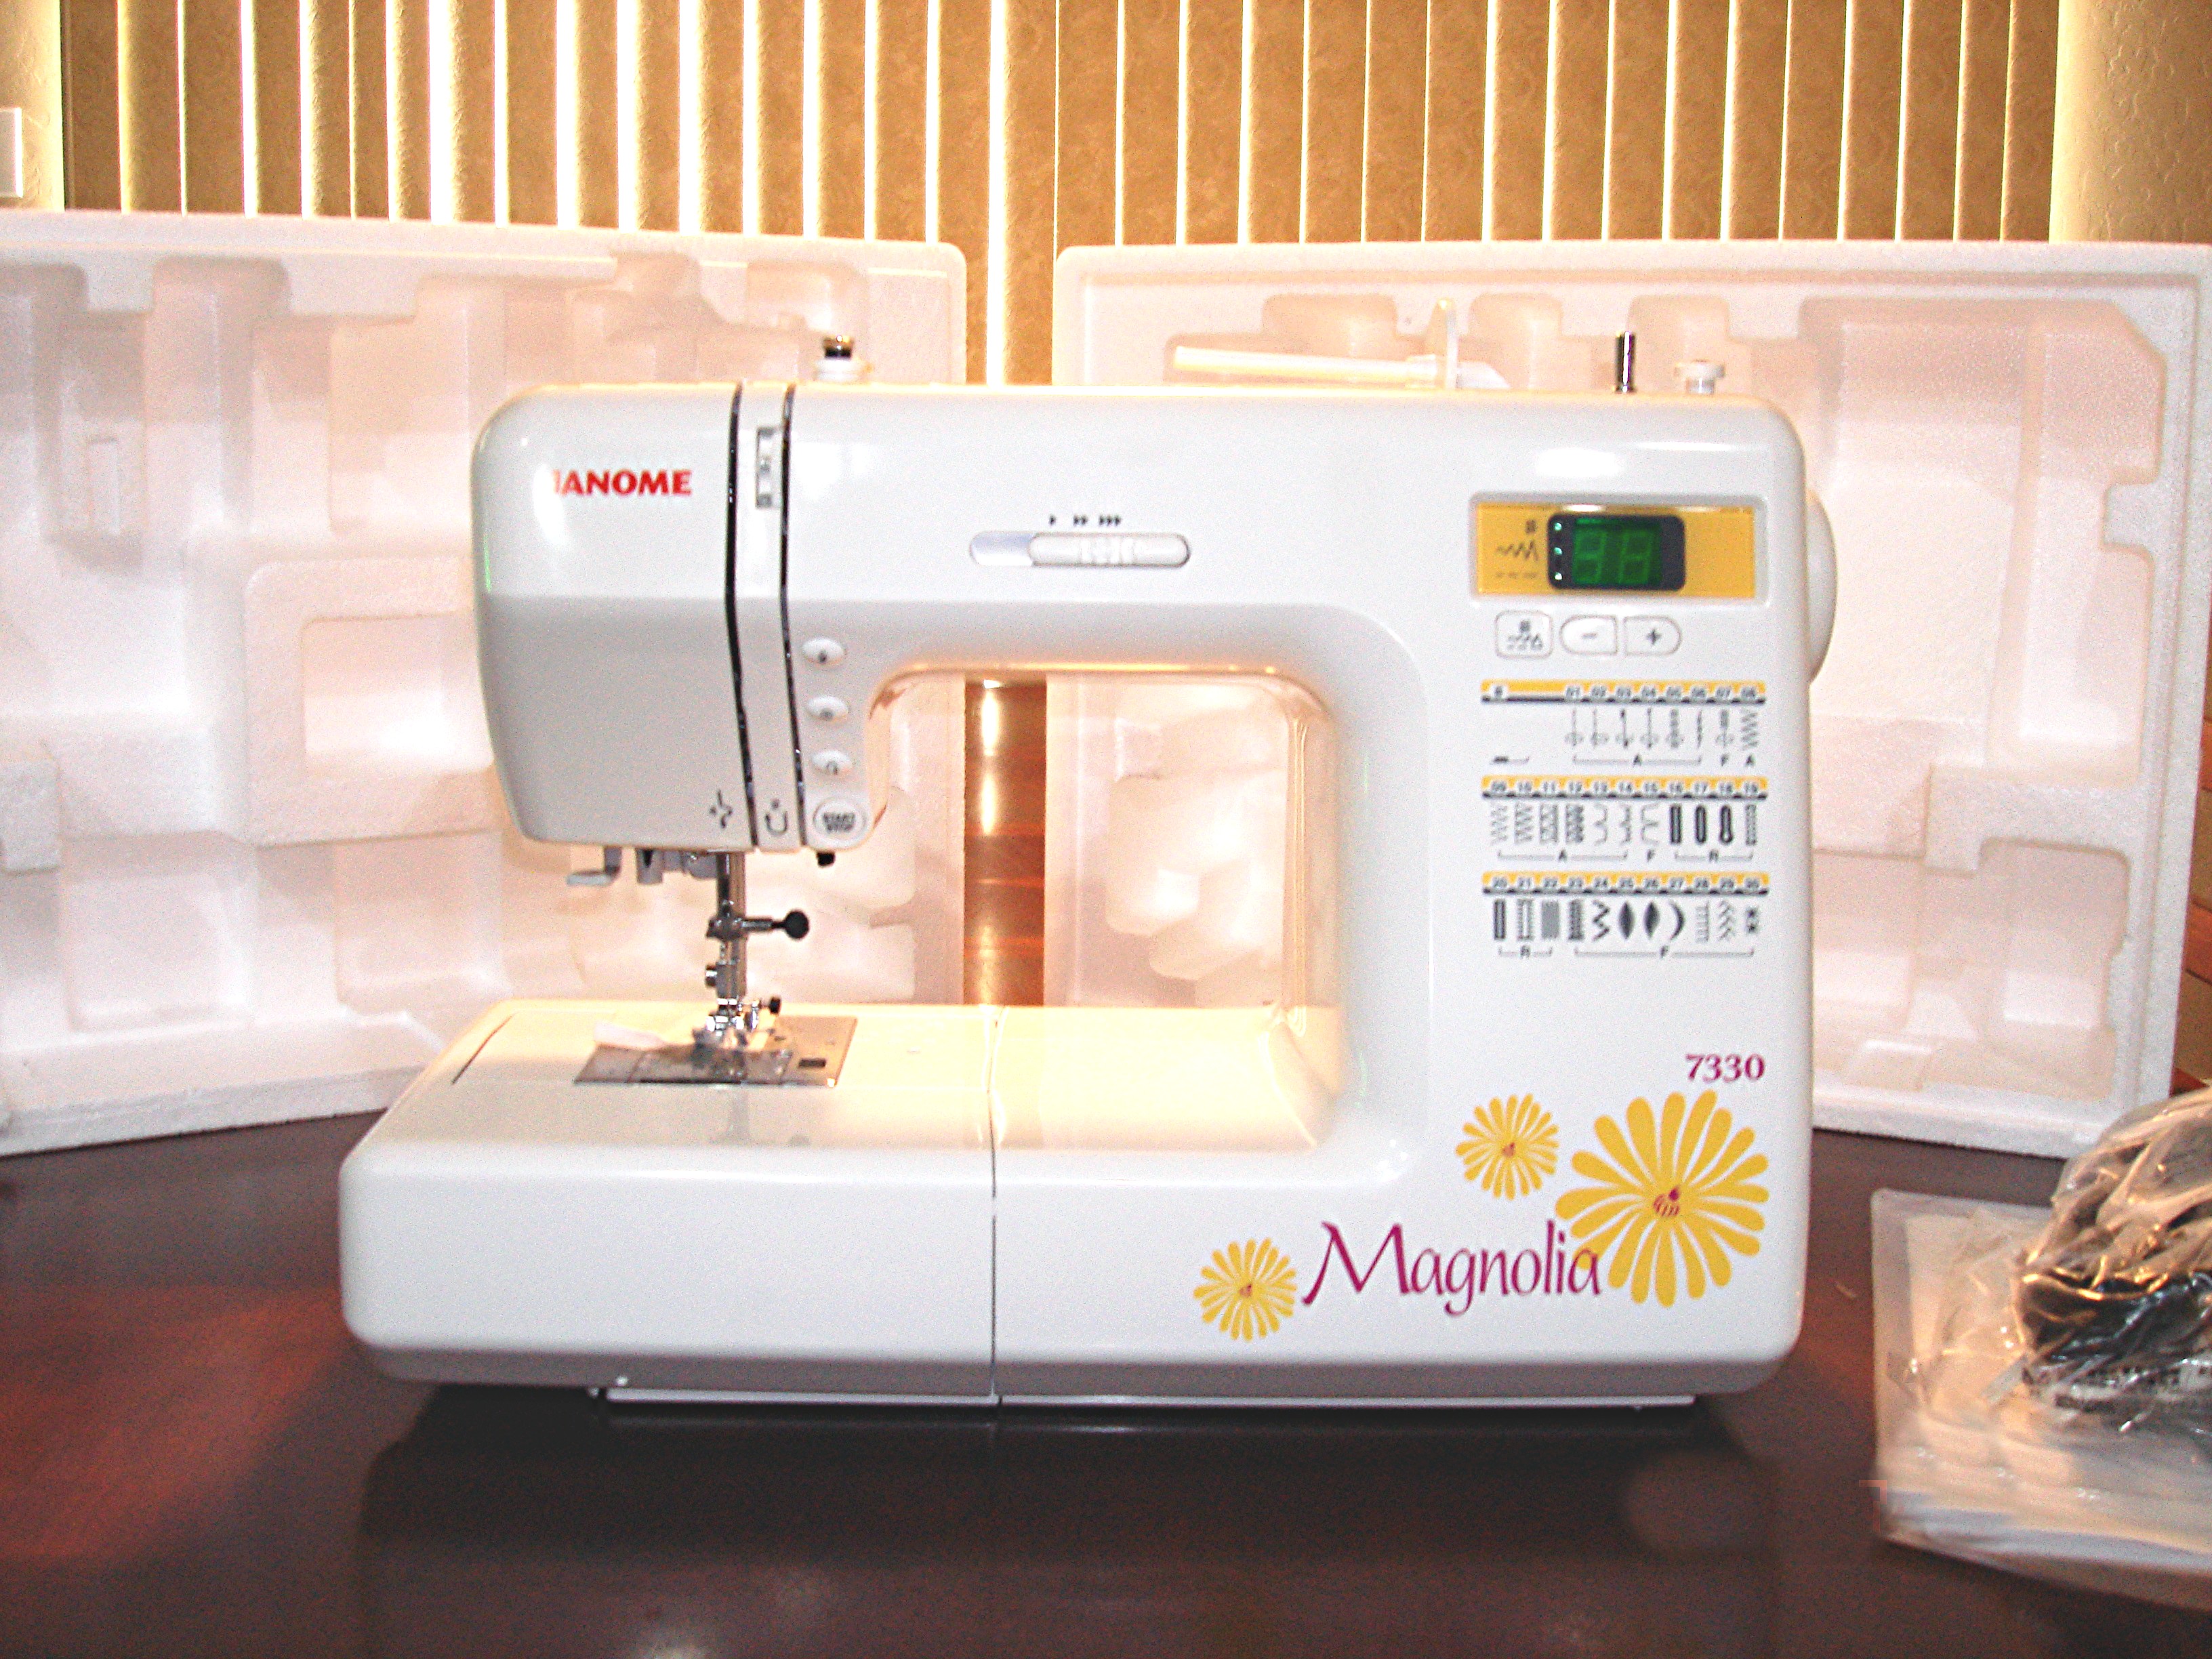 Singer 9960 Quantum Stylist Sewing Machine Review